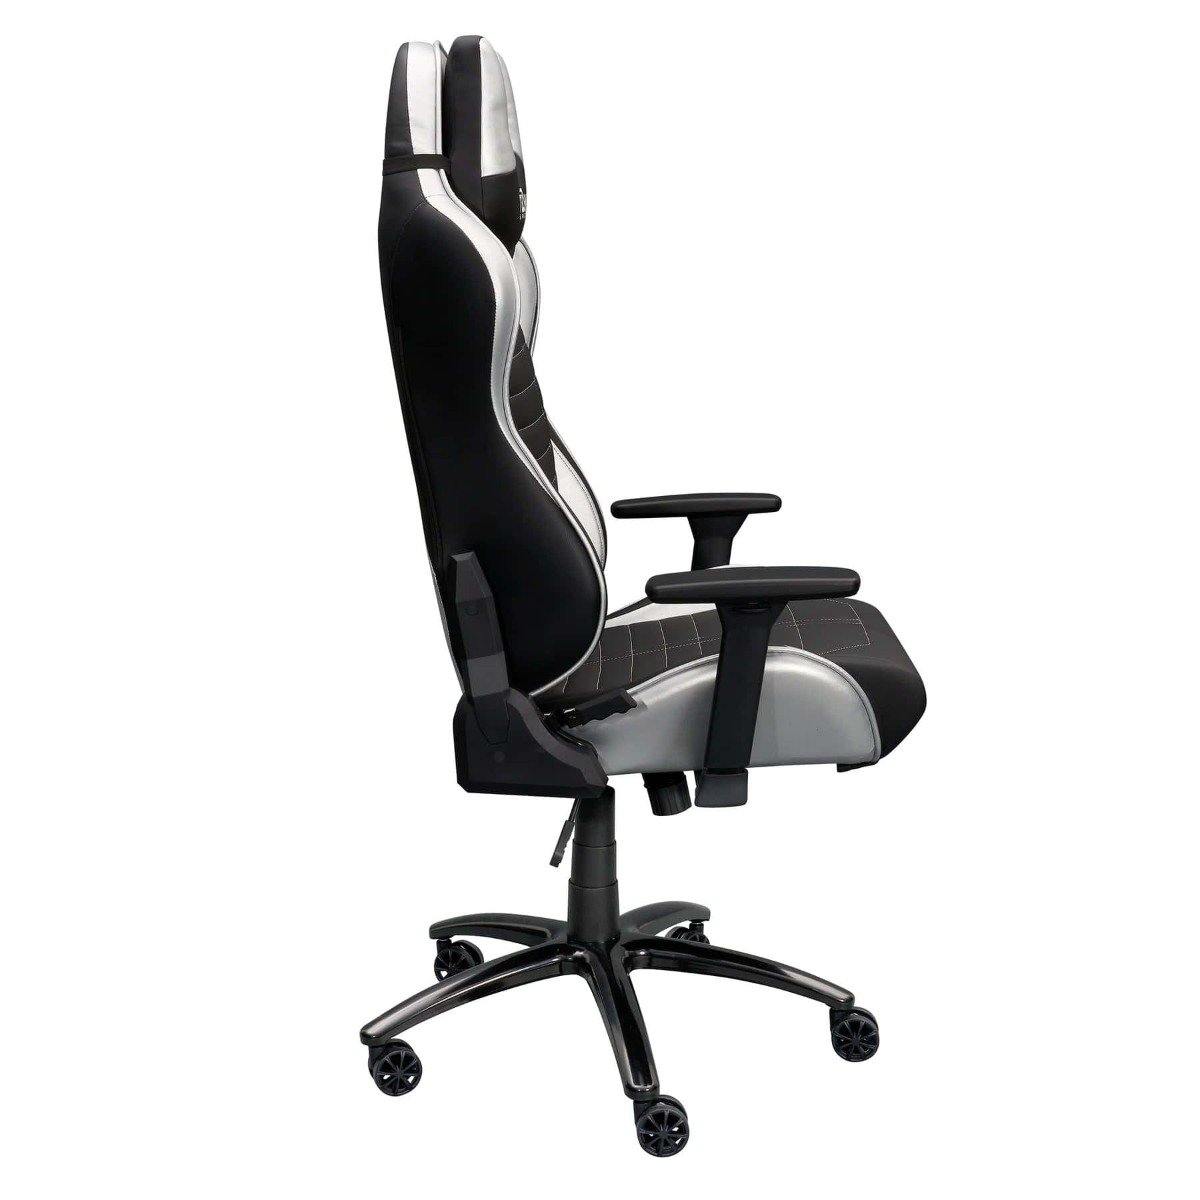 Techni Sport TS-62 Silver Ergonomic Racing Style Gaming Chair RTA-TS62C-SIL Side #color_silver